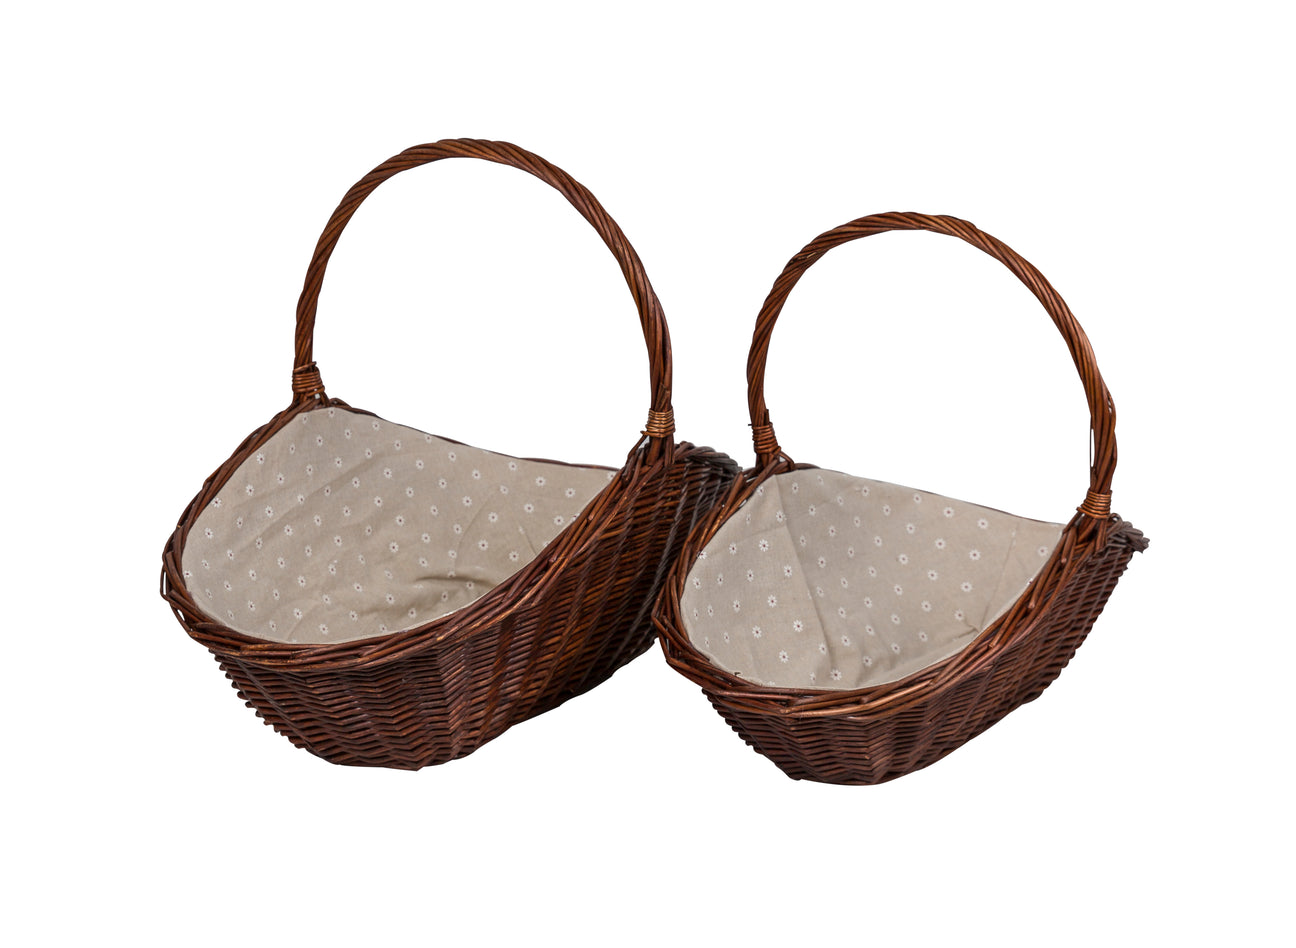 Image of a large and small wicker basket